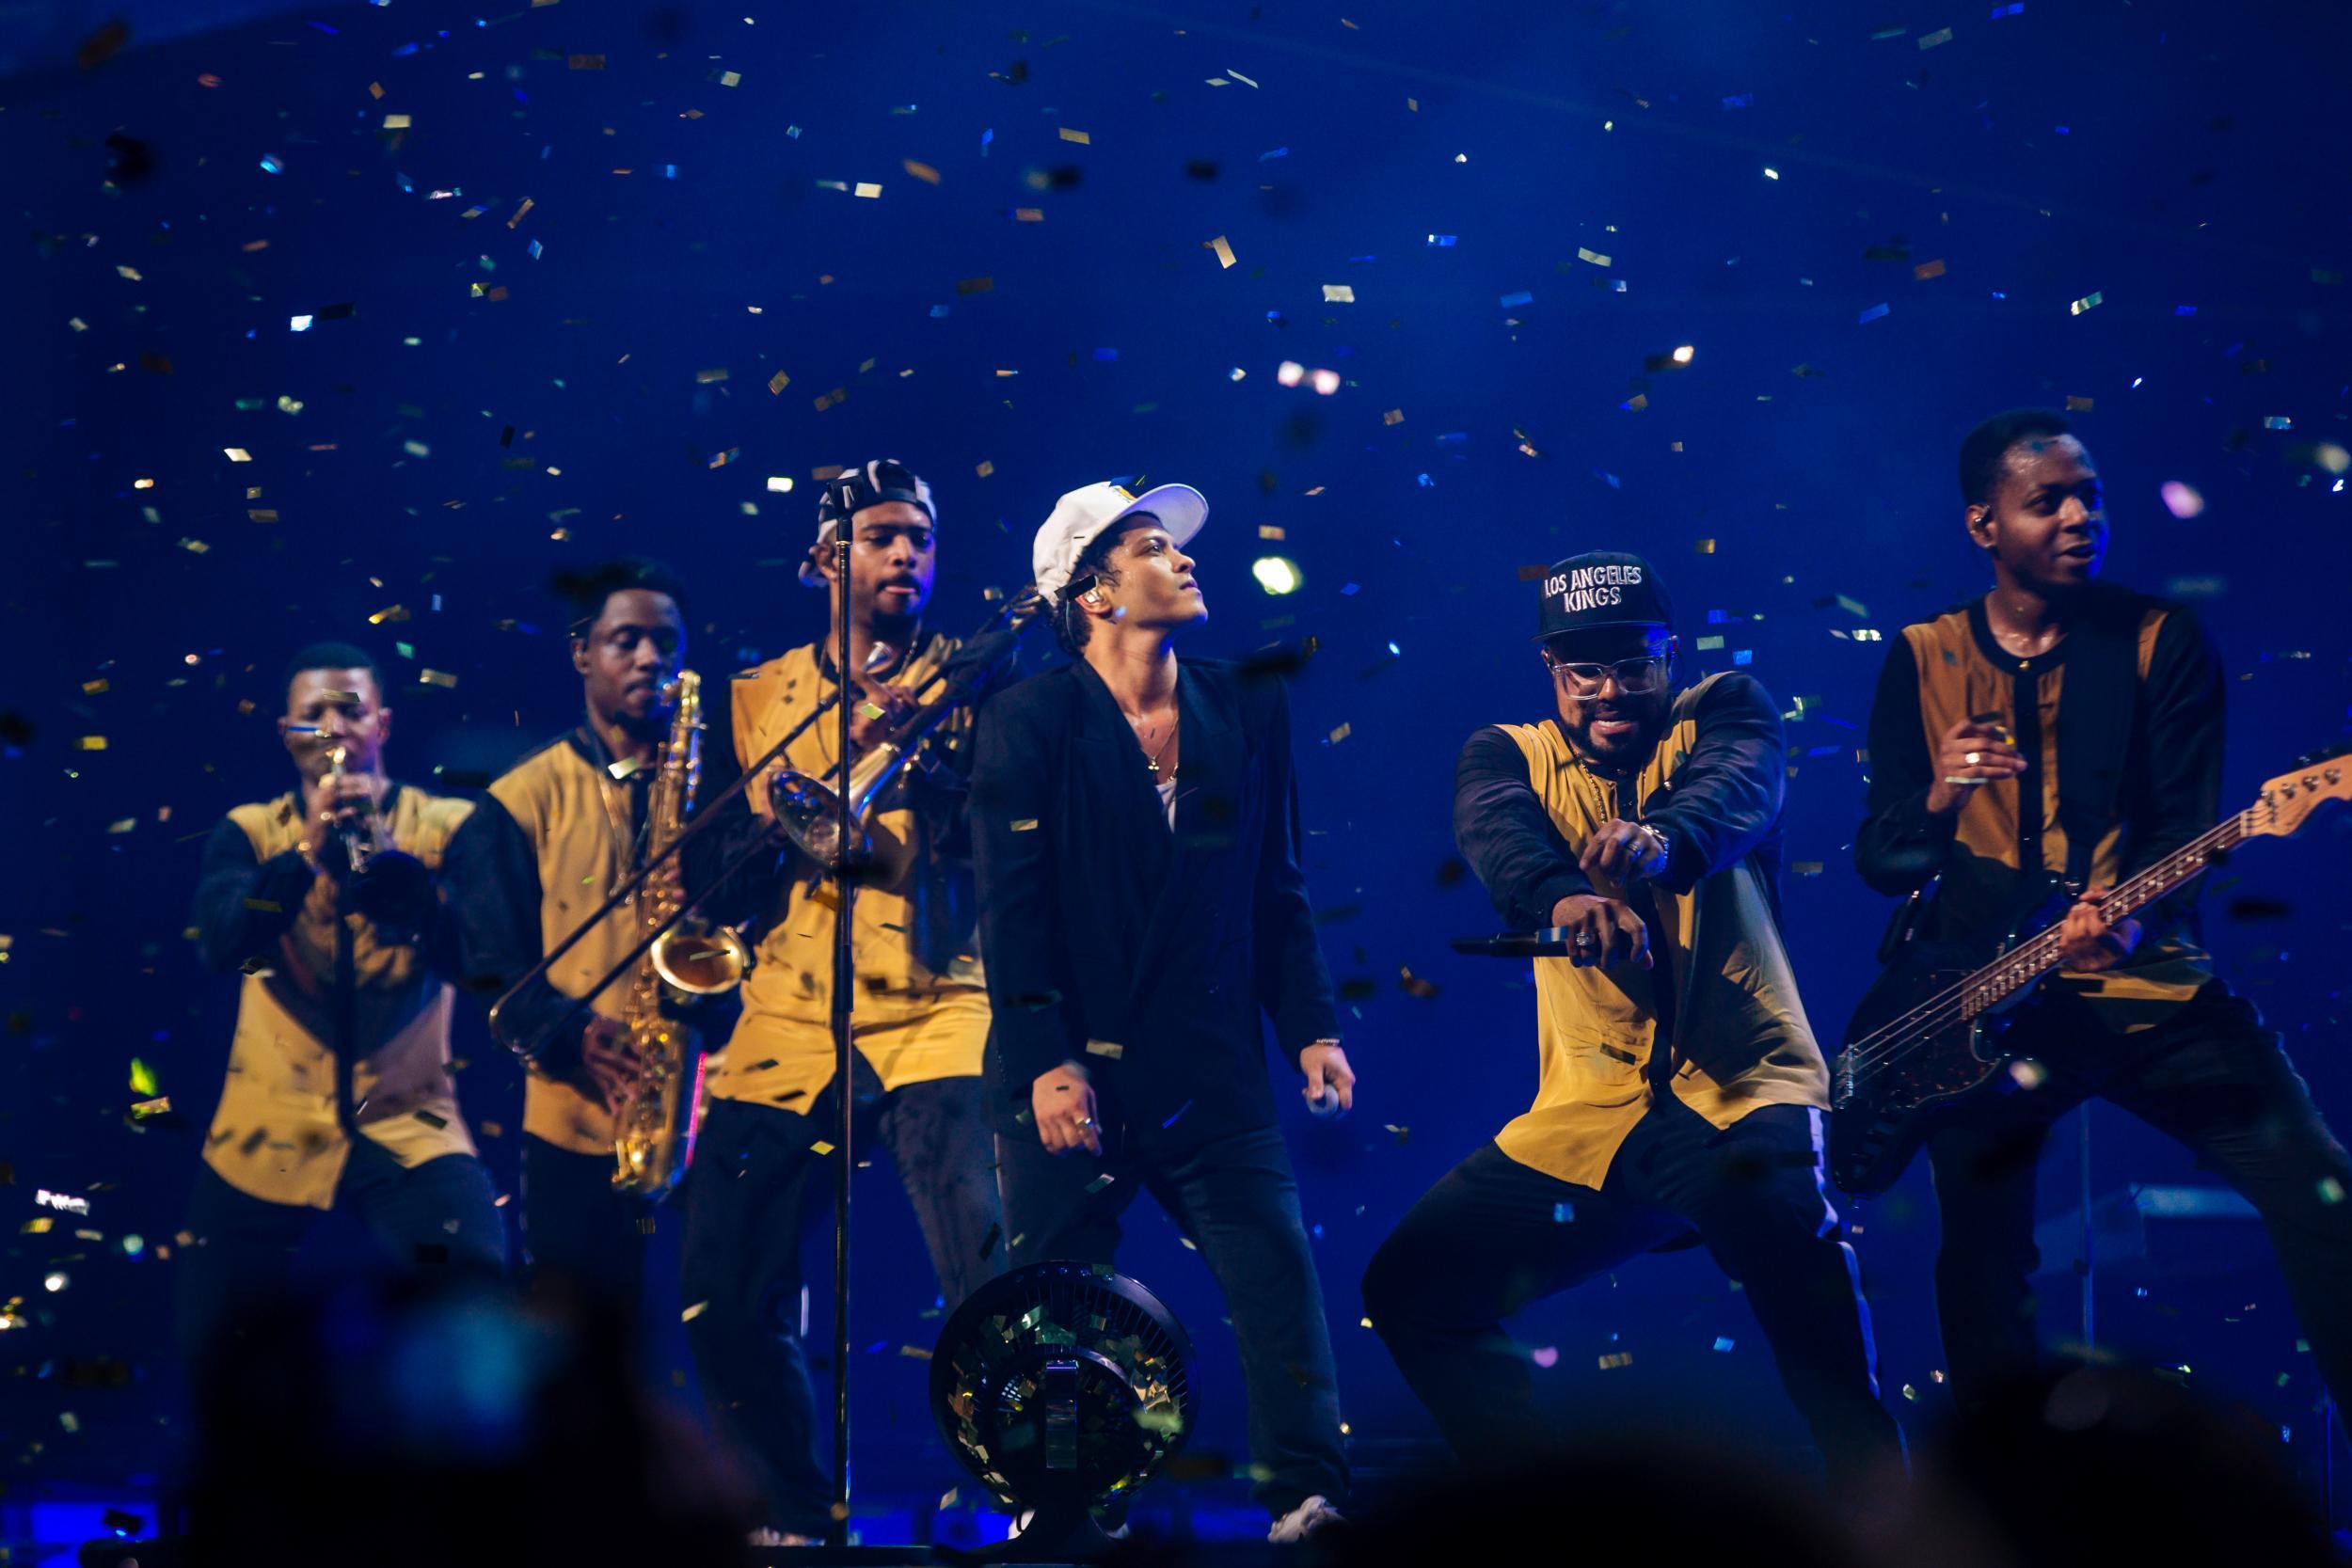 Bruno Mars performs at a sold-out O2 Arena